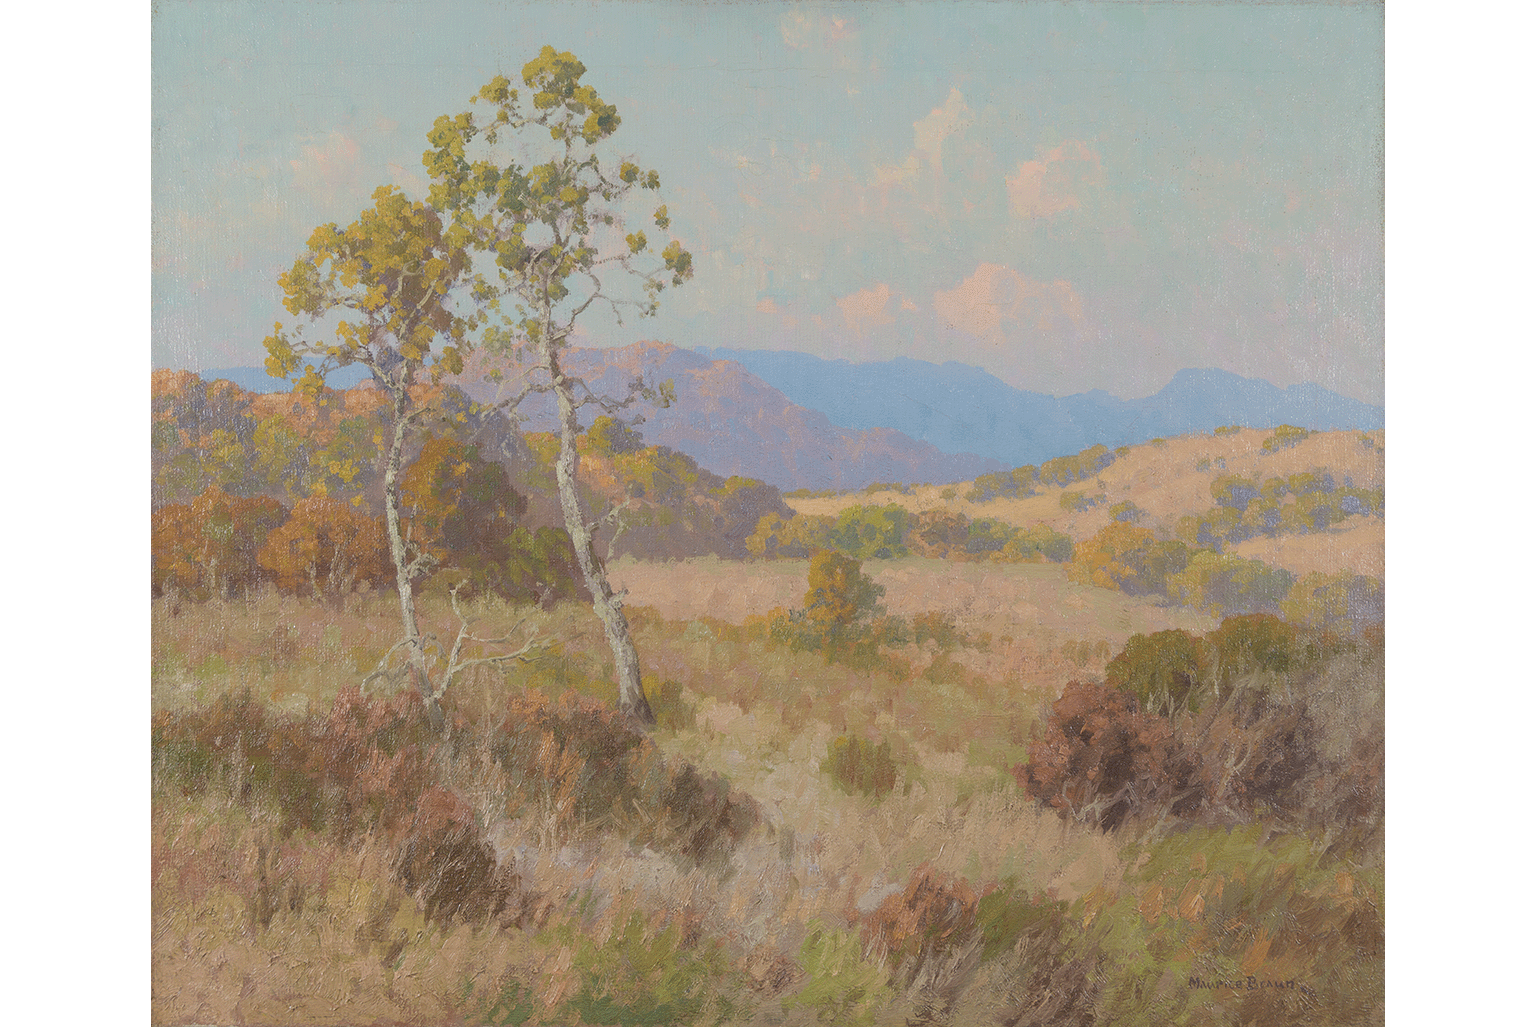 Maurice Braun, Summer's Sycamores, after 1909, Oil on canvas, 25 x 30 in. UCI Jack and Shanaz Langson Institute and Museum of California Art, Gift of The Irvine Museum, photo courtesy of the Balboa Art Conservation Center